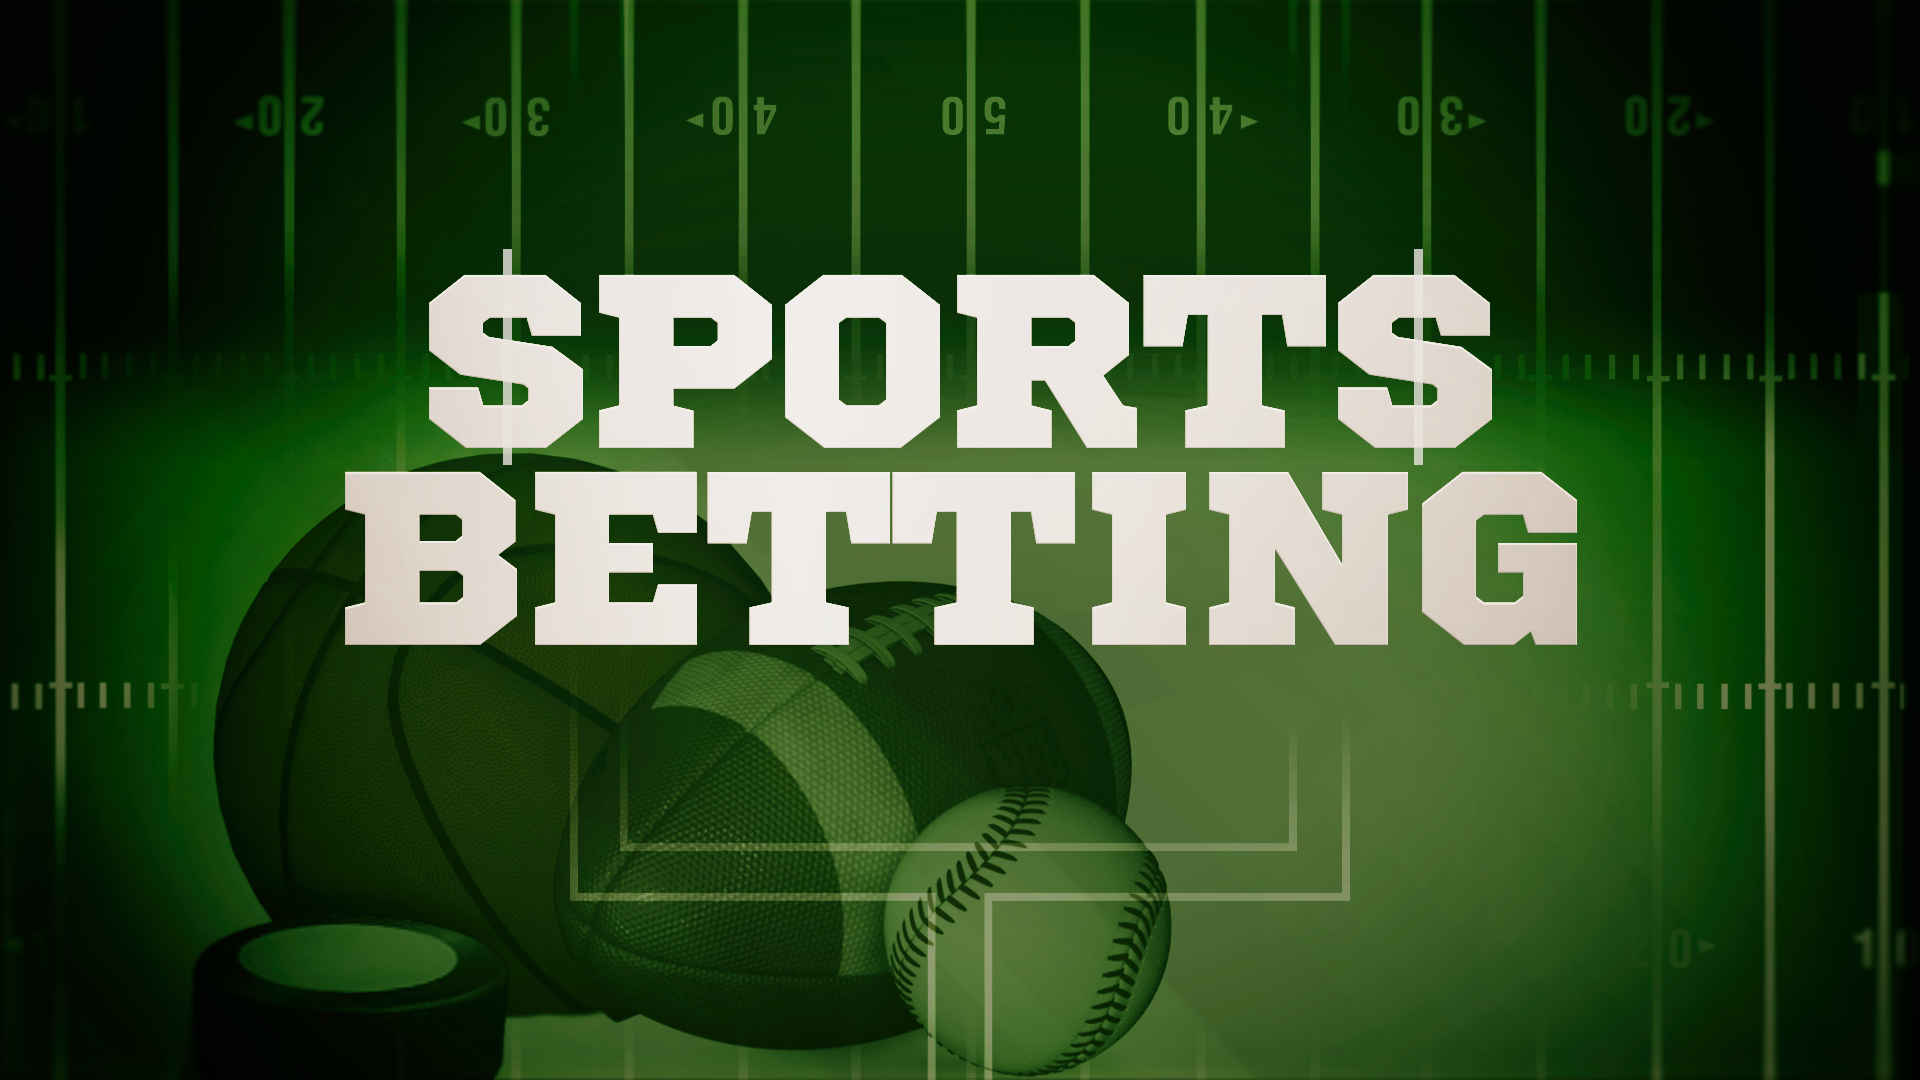 Tennessee Sports Betting Regulations Enter Extended Comment Period